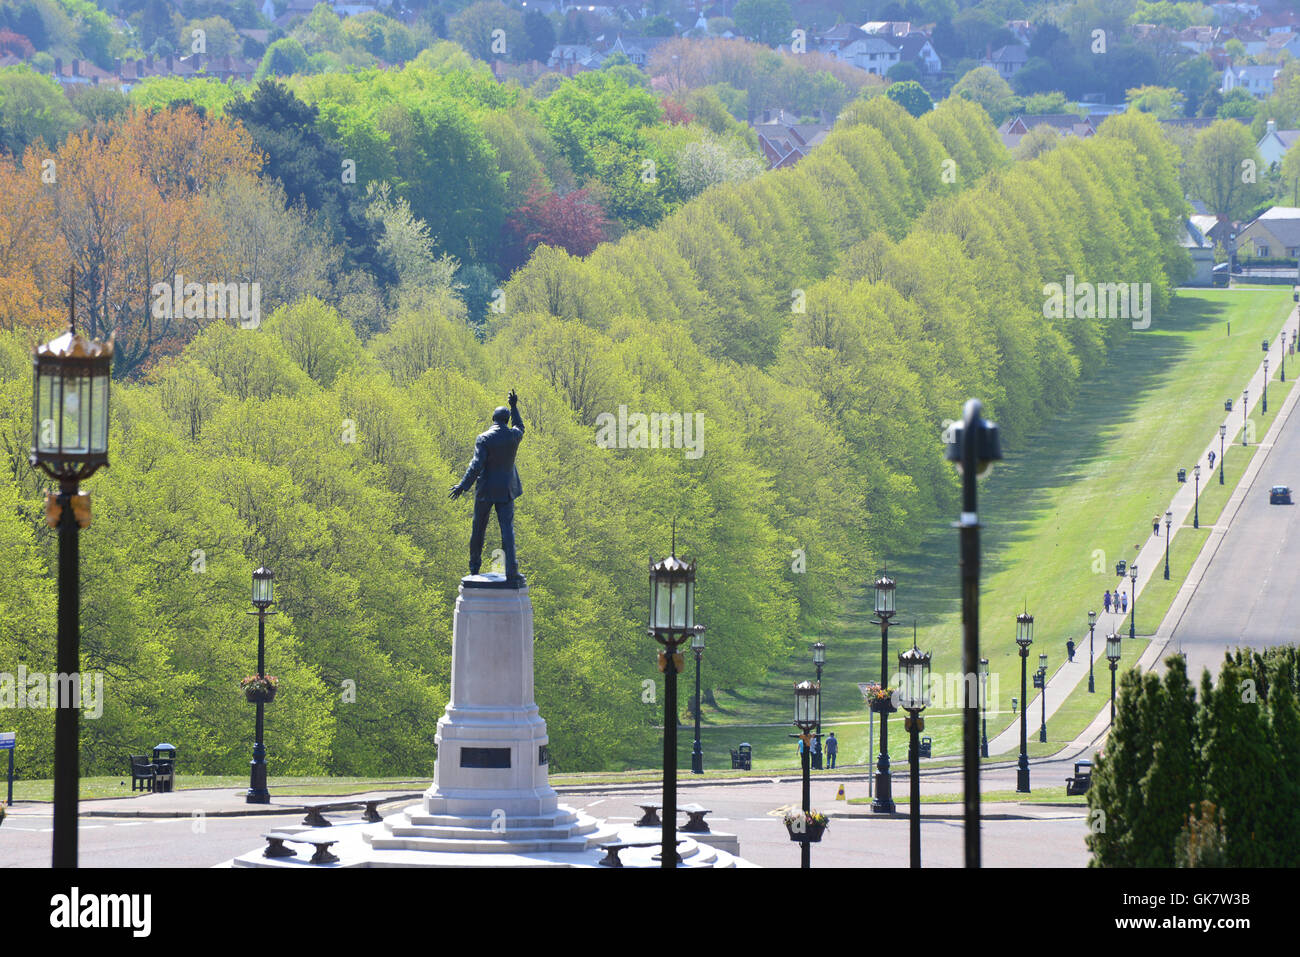 Looking downhill at Storming with the statue of Lord Carson, Belfast Stock Photo